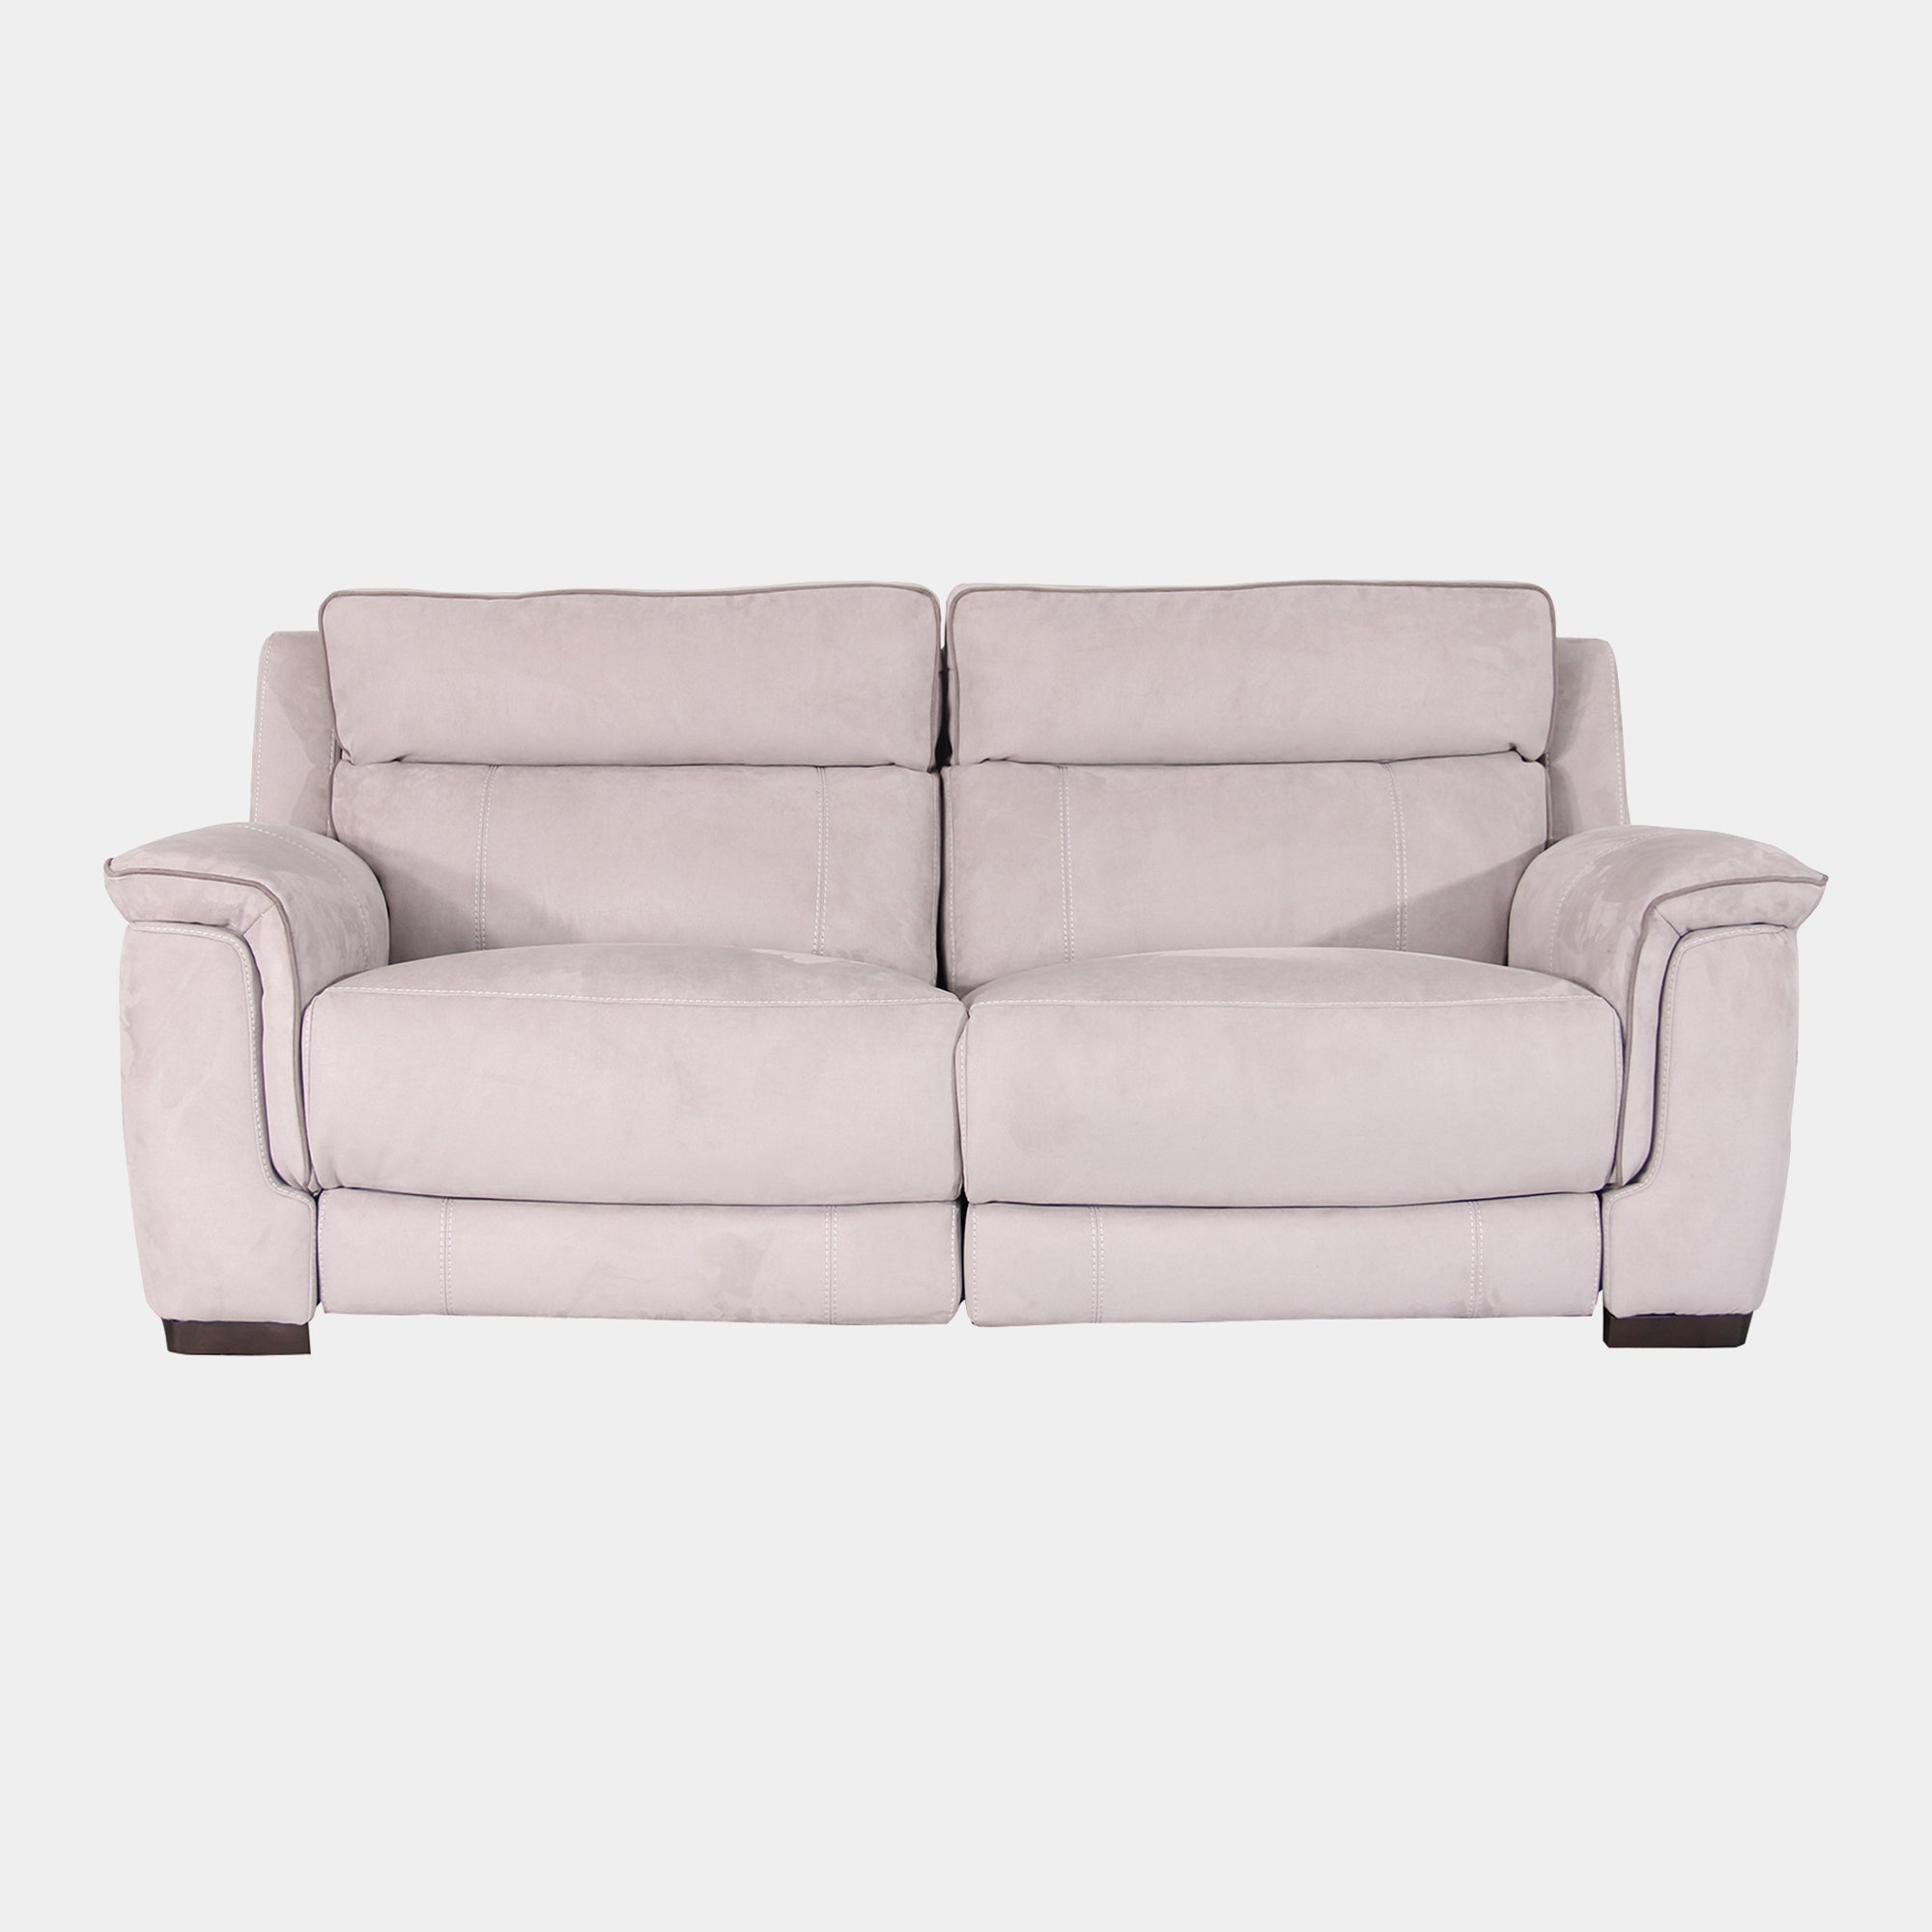 Monza - 2.5 Seat Sofa With Double Power Recliner In Fabric